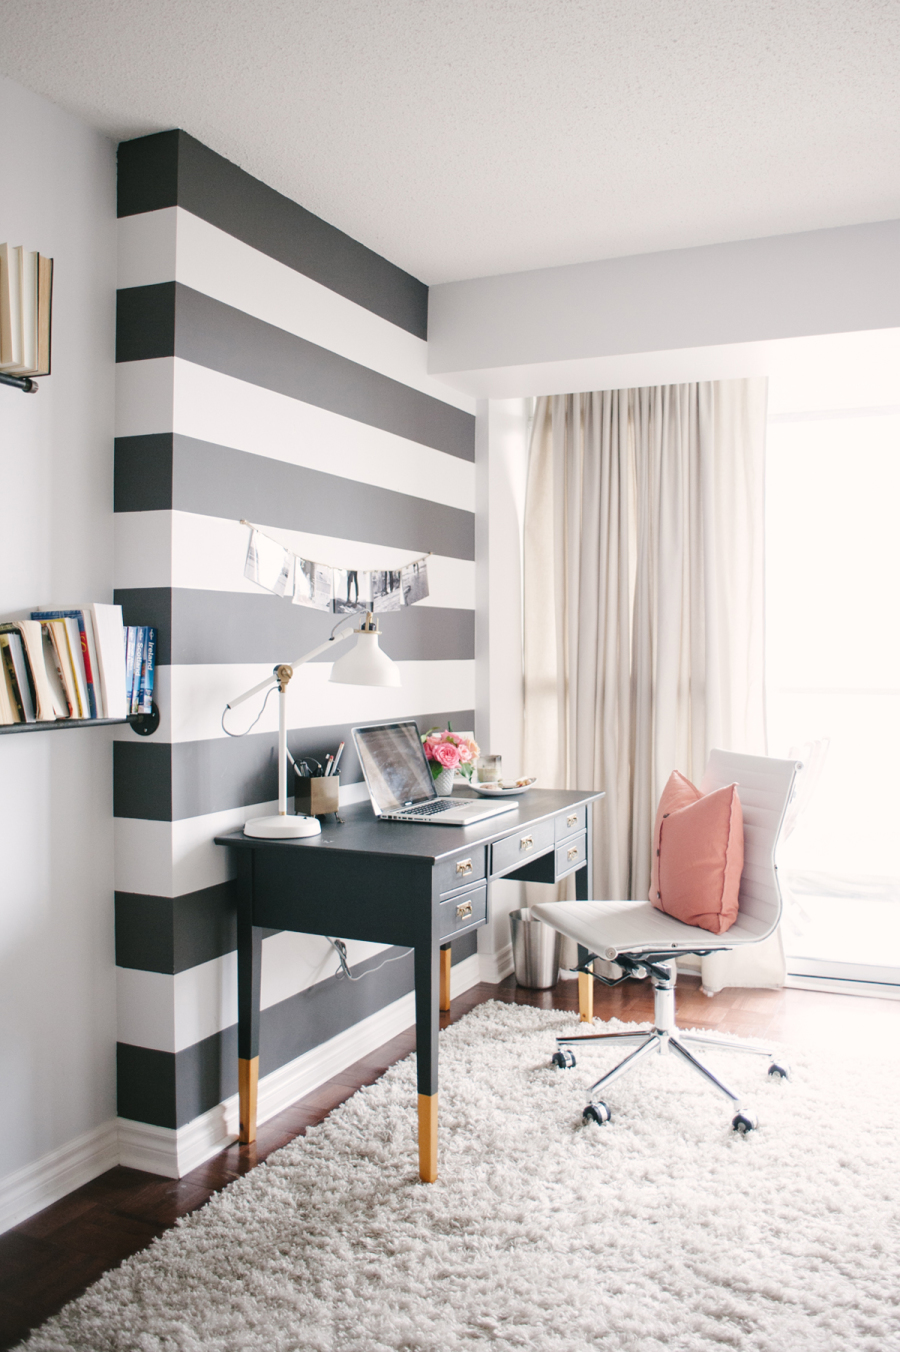 Decorating With Black and White 